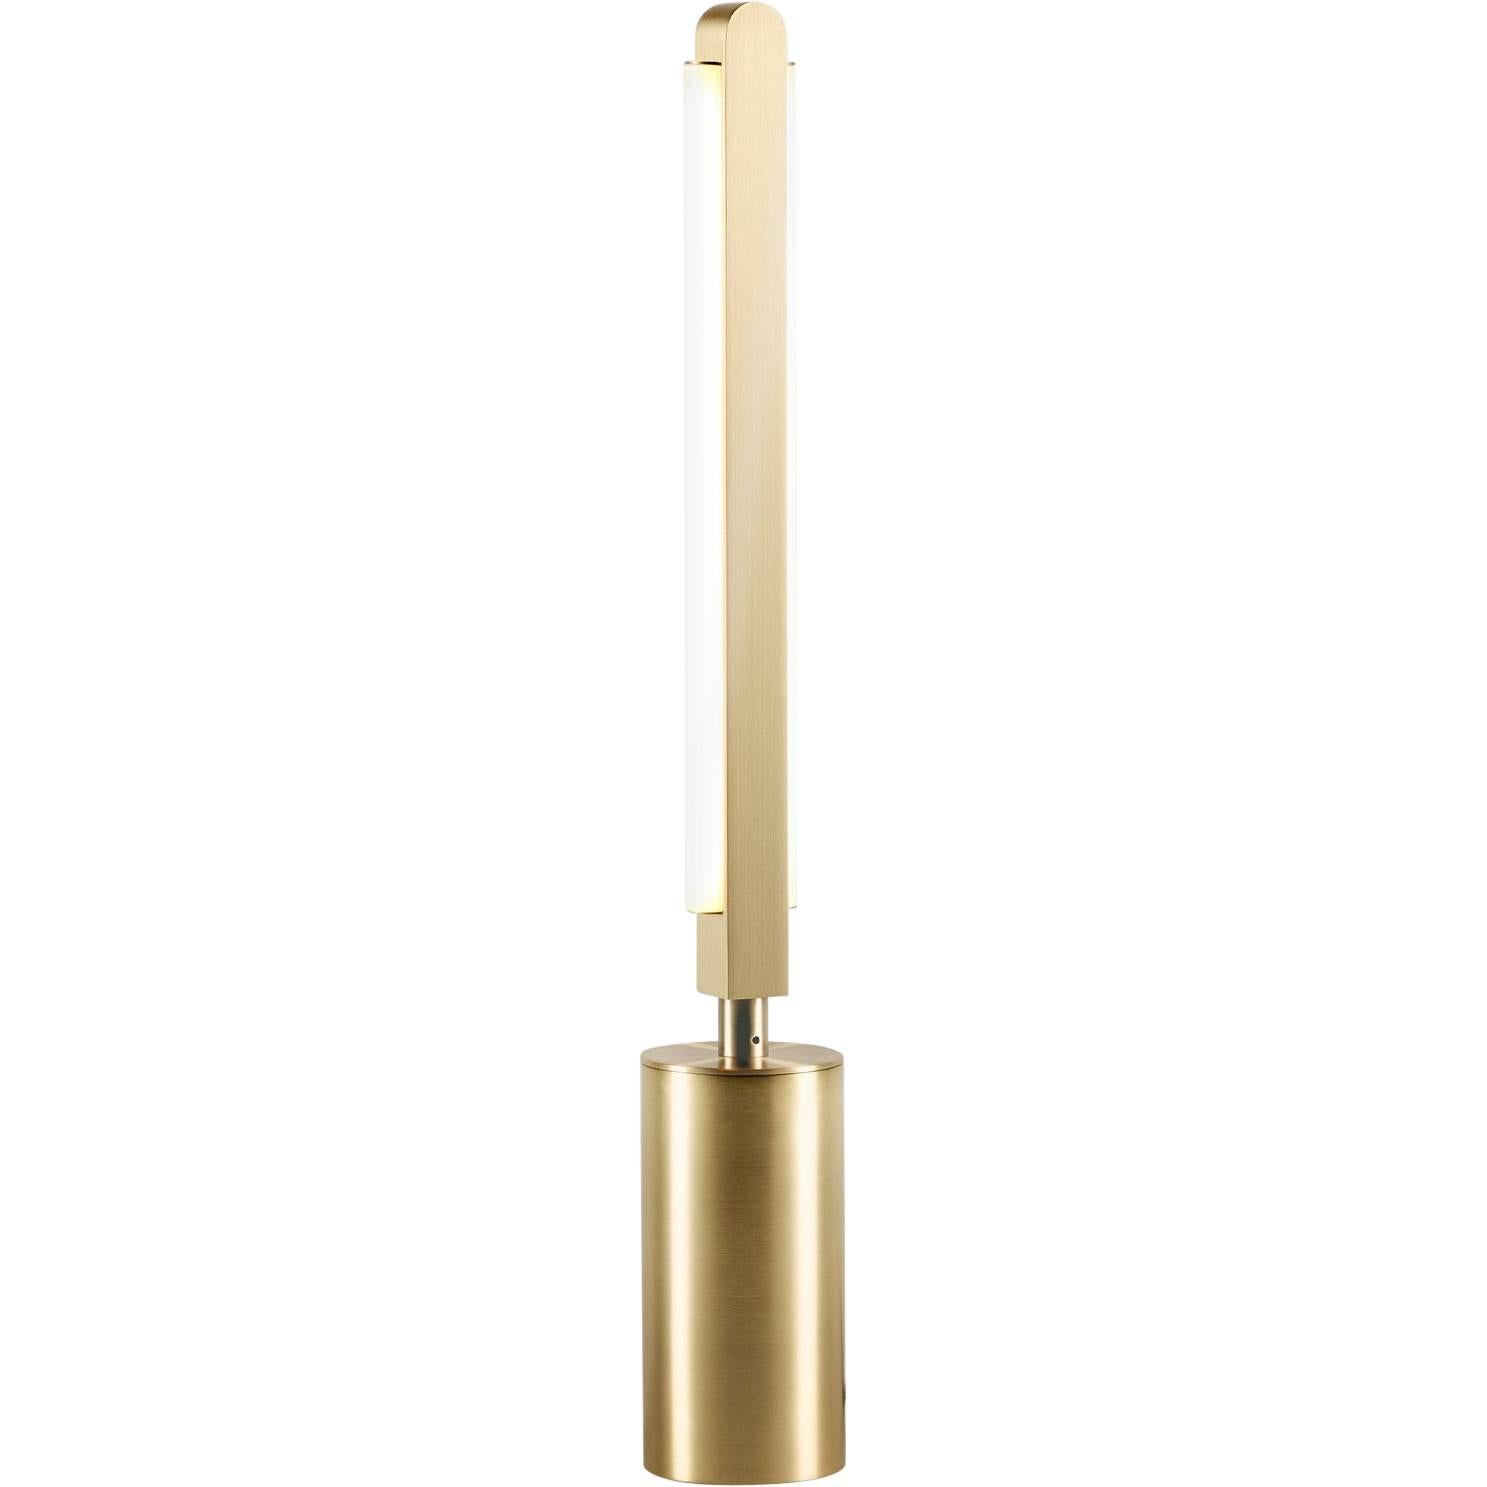 Pris Table Lamp in Satin Brass by PELLE